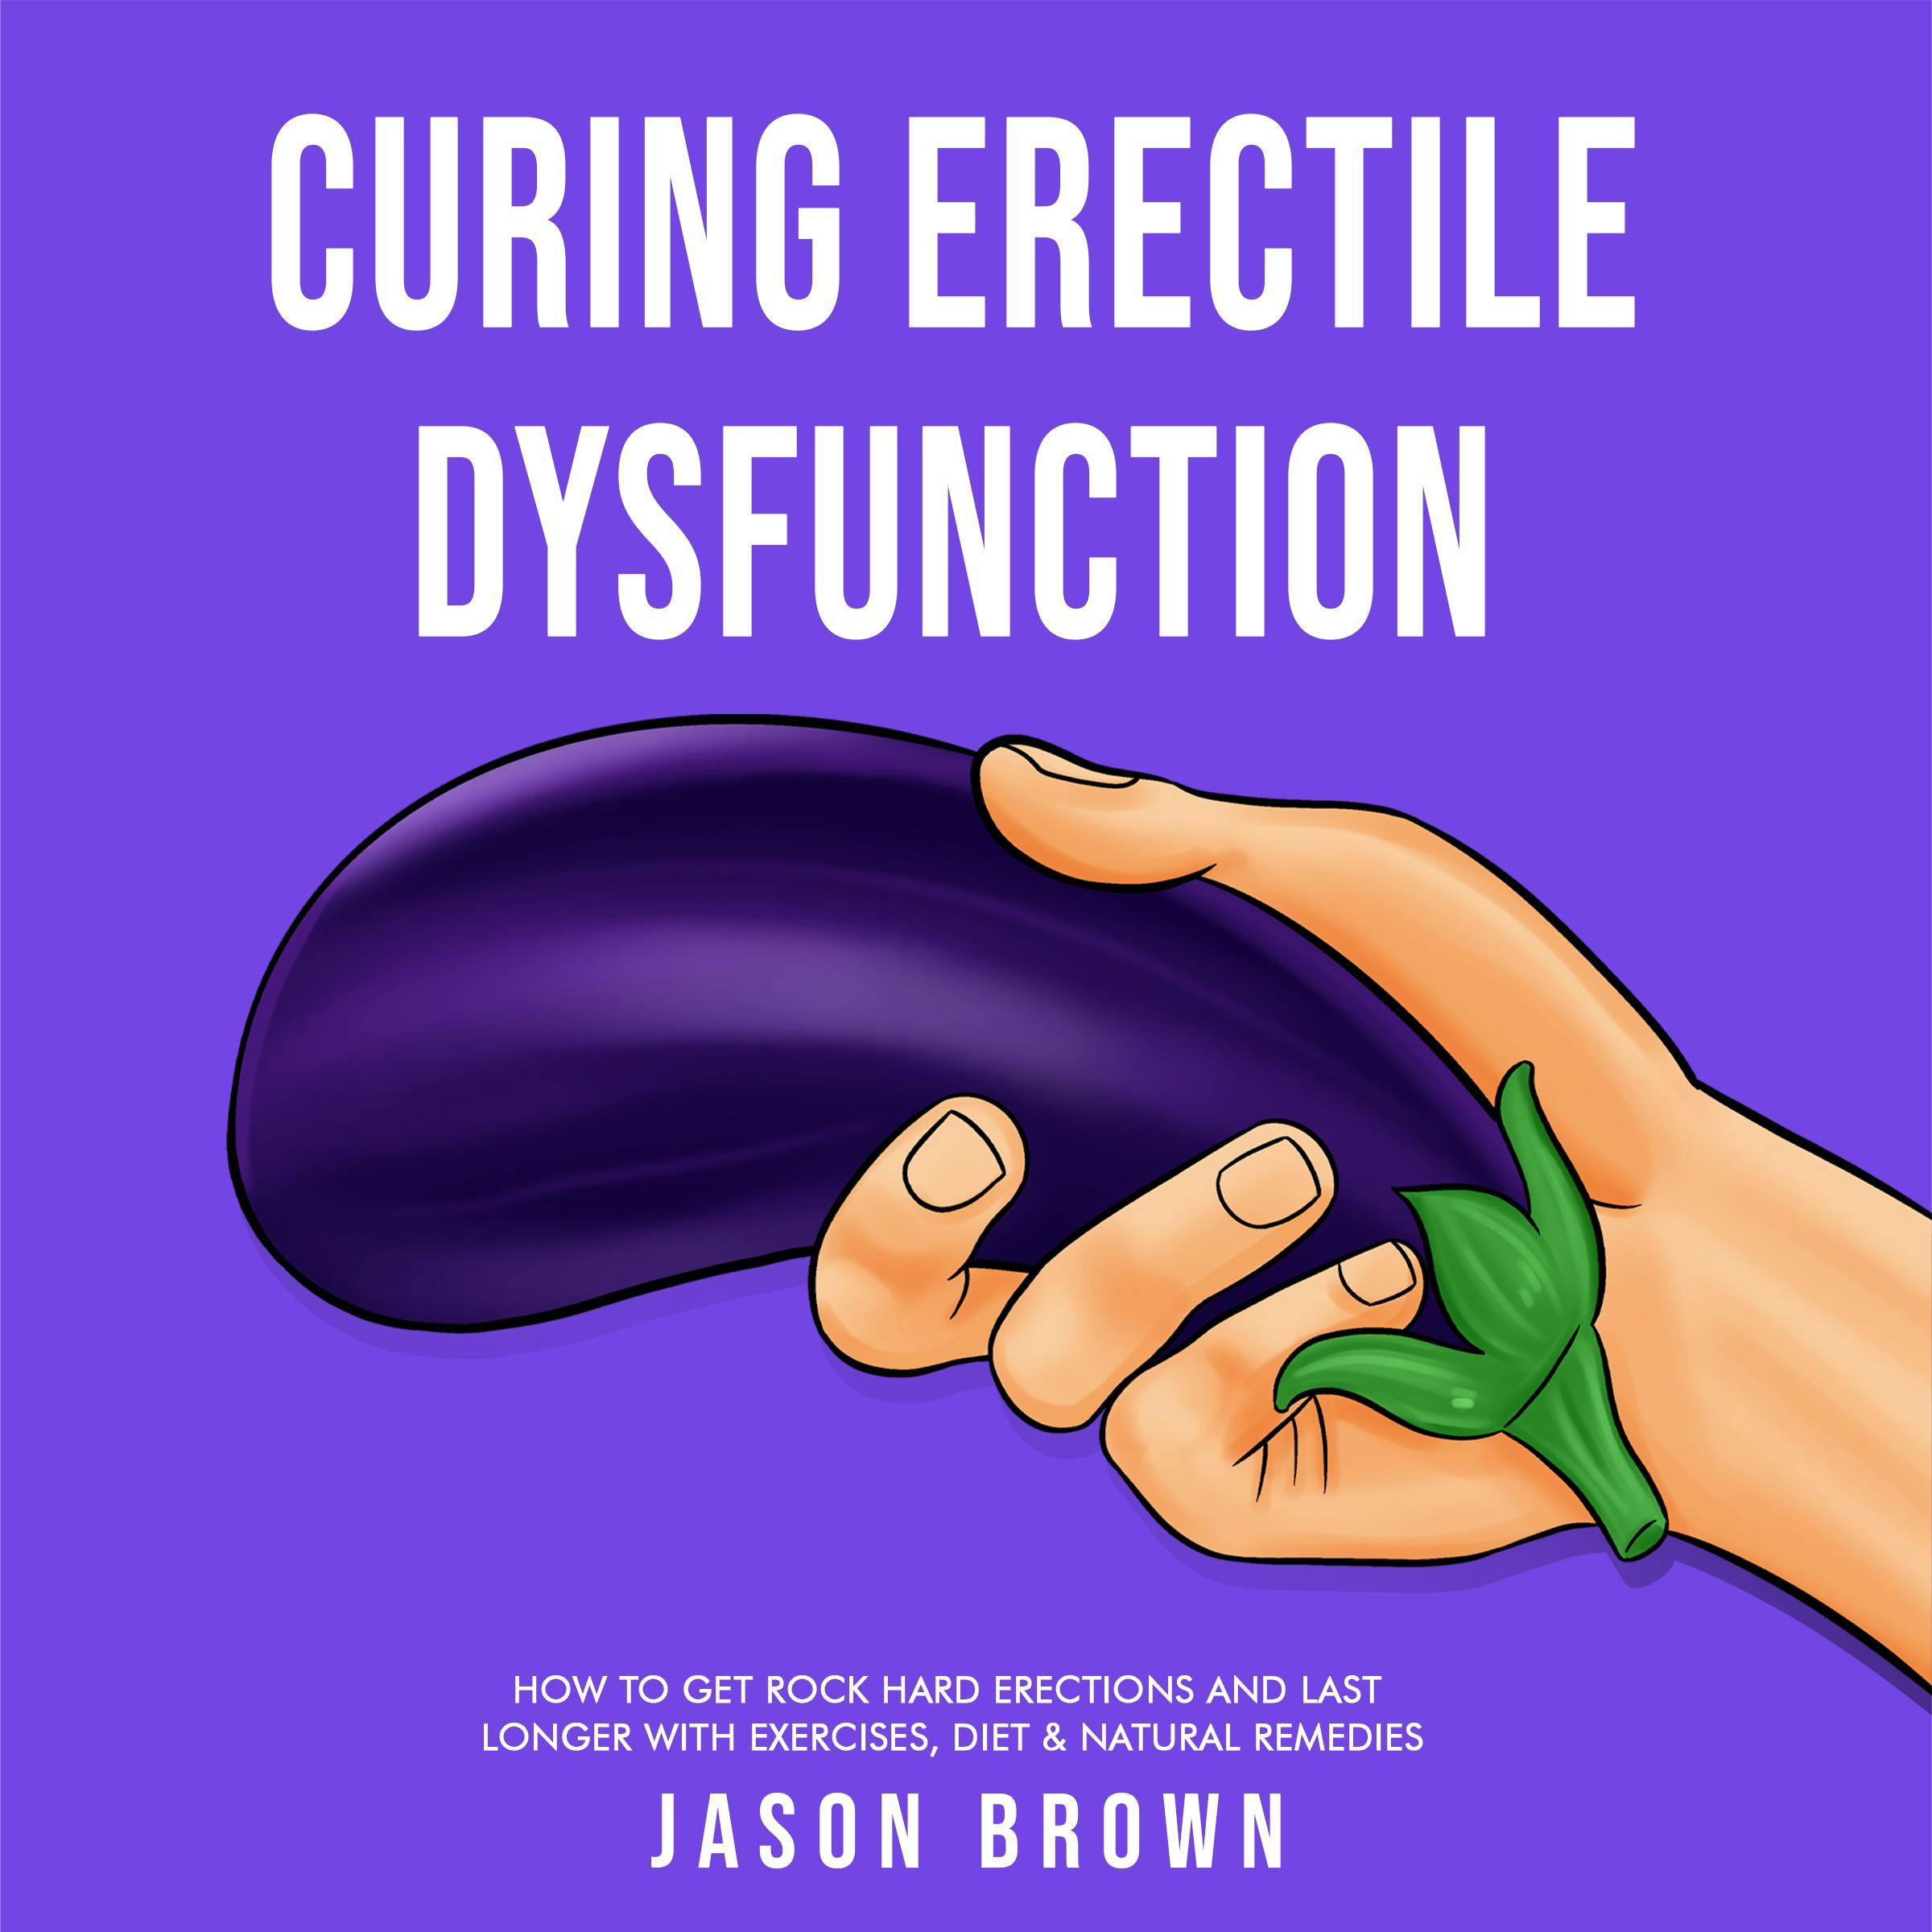 Curing Erectile Dysfunction - How to Get Rock Hard Erections and Last Longer With Exercises, Diet & Natural Remedies - undefined